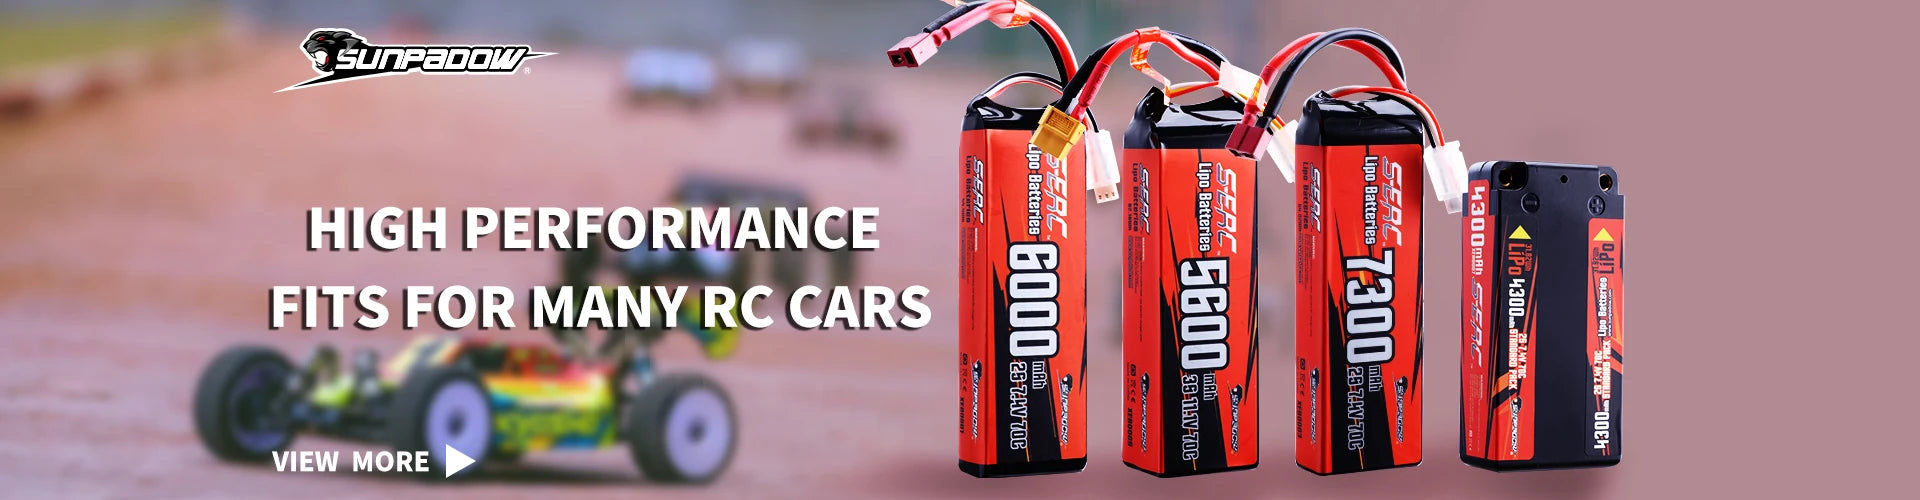 SUNPADOW 3S Lipo Battery, 3.Don't overcharge more than 4.2V . Never leave battery unattended